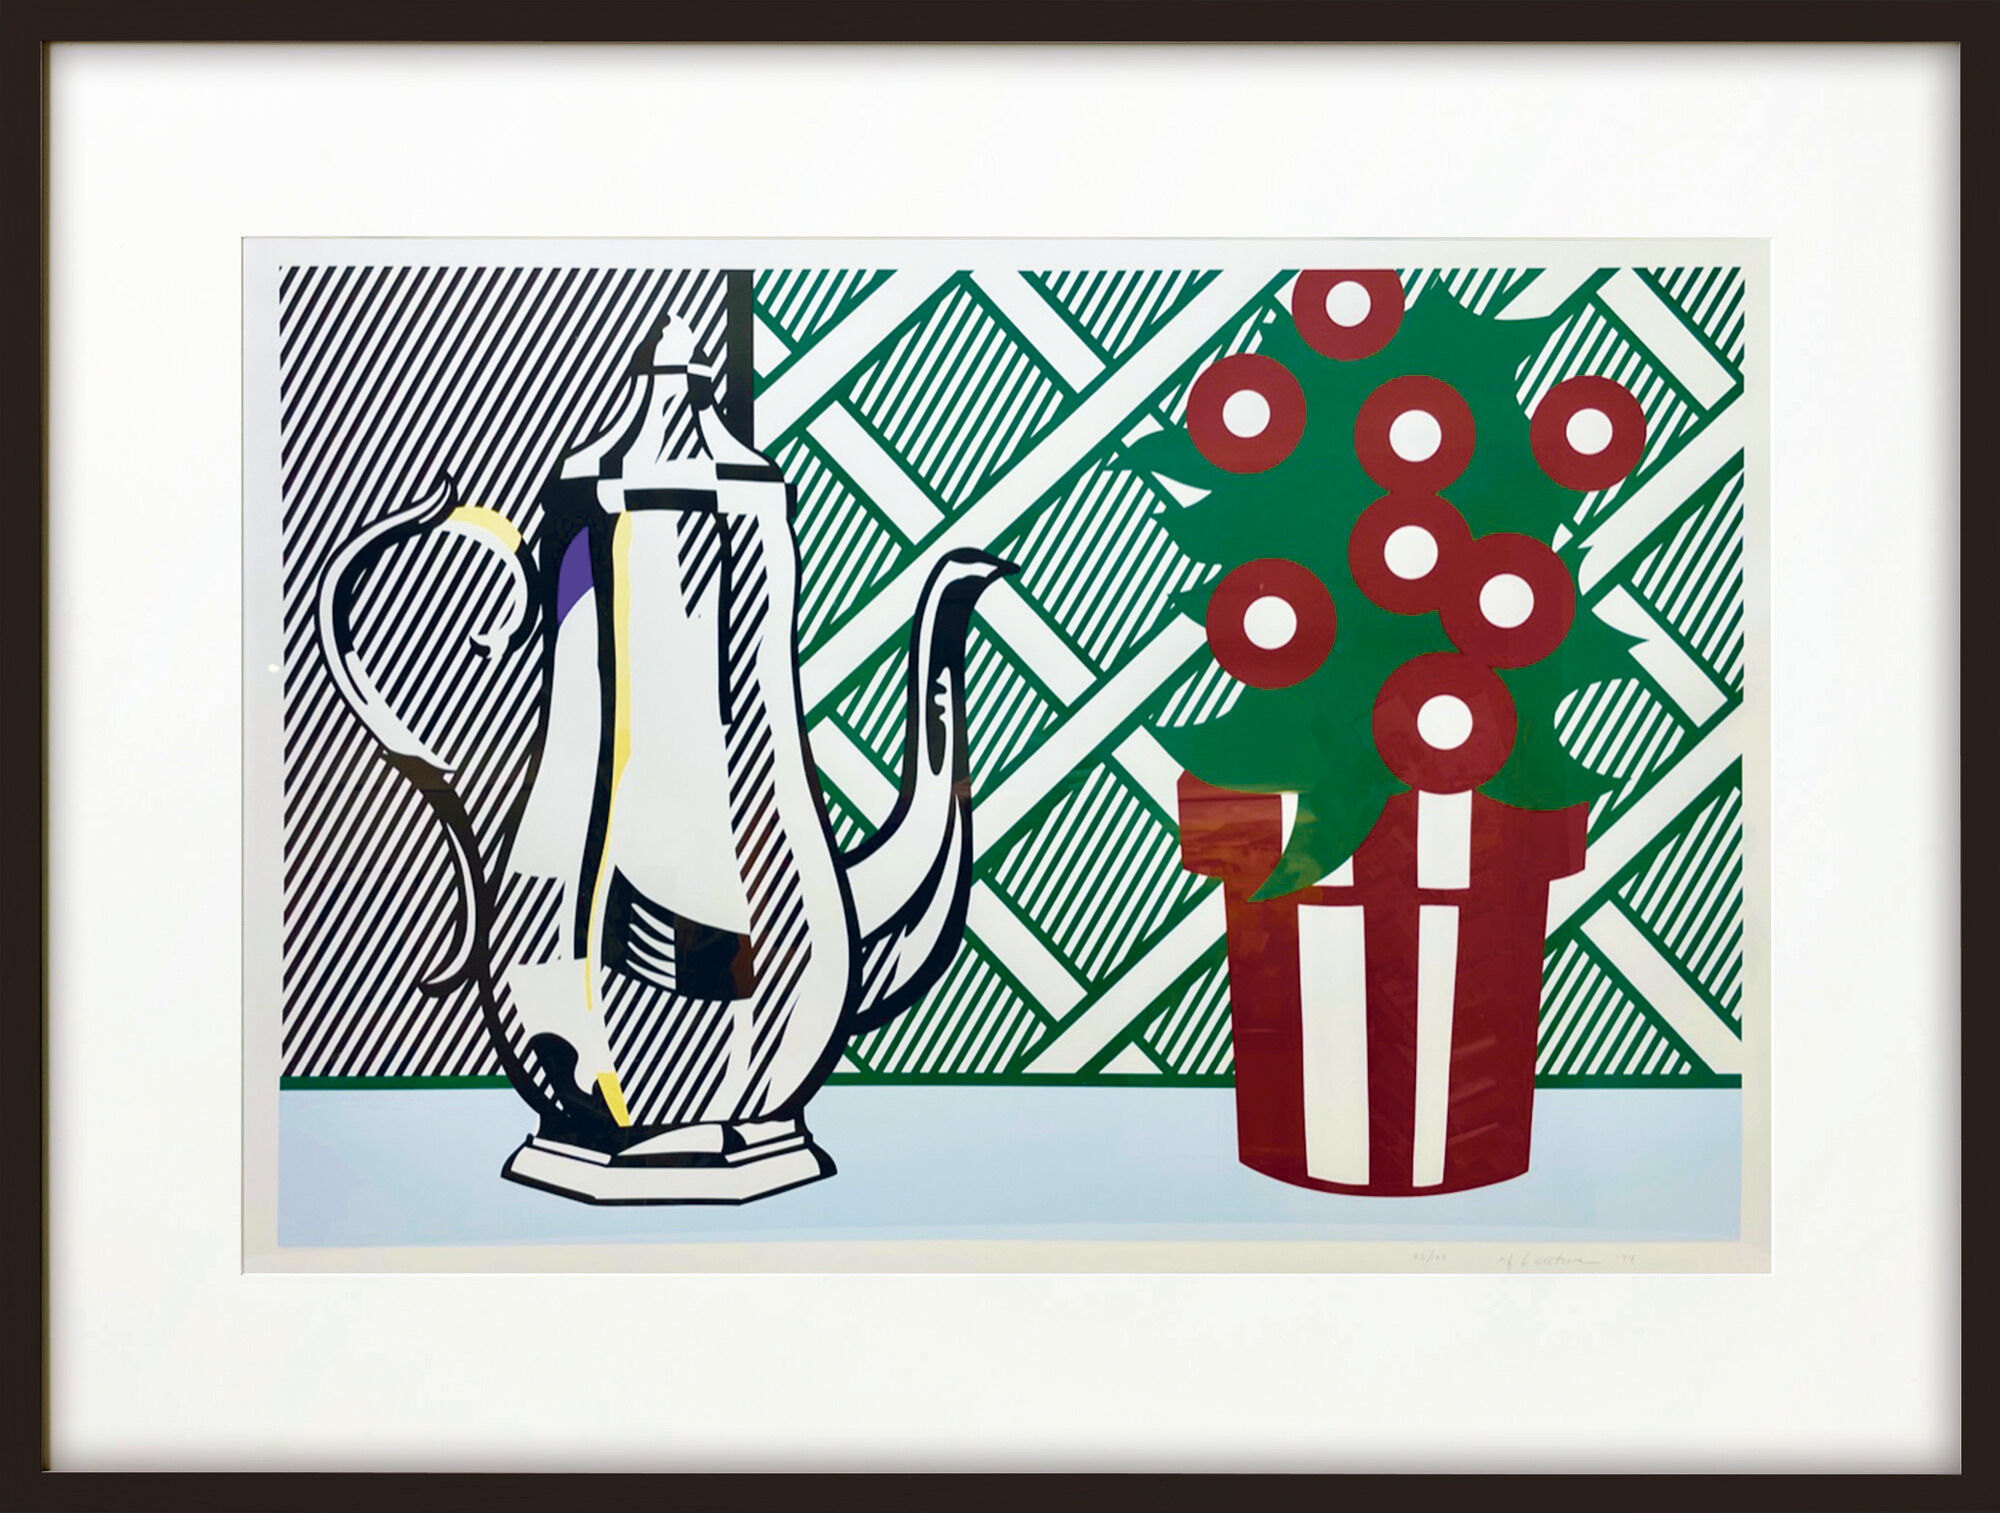 Picture "Still Life with Pitcher and Flowers" (1974) by Roy Lichtenstein